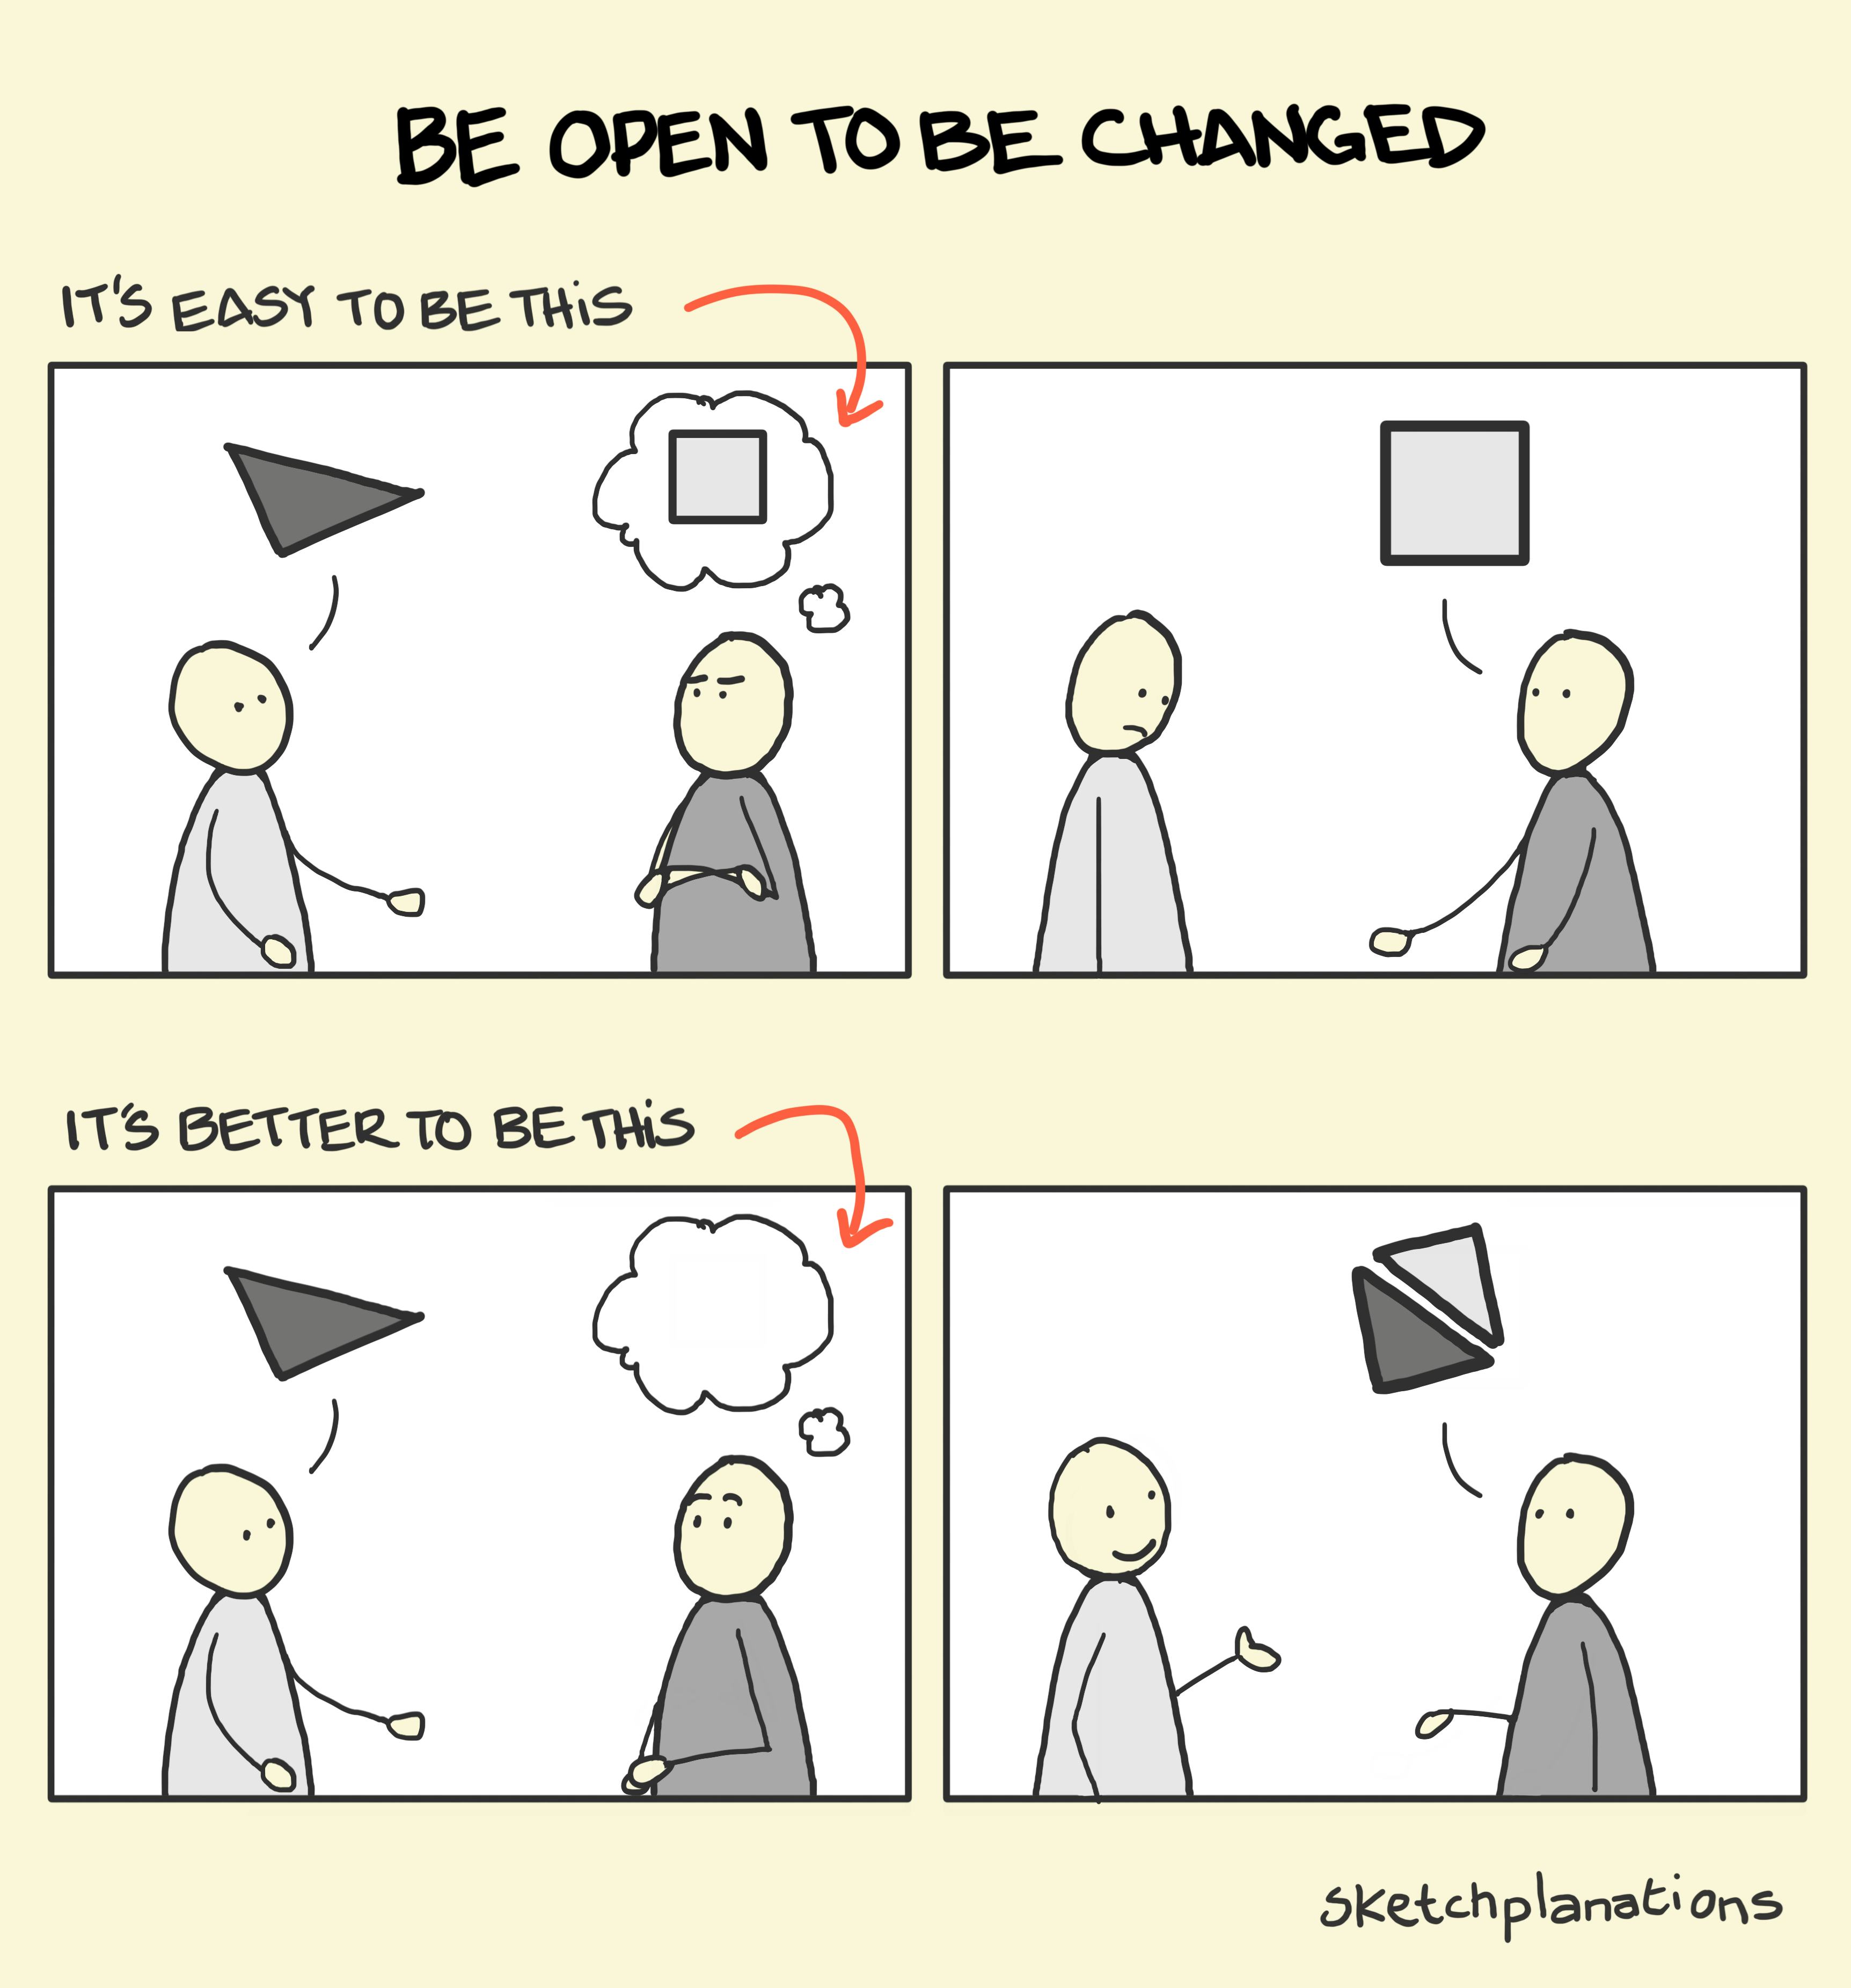 Be open to be changed - Sketchplanations